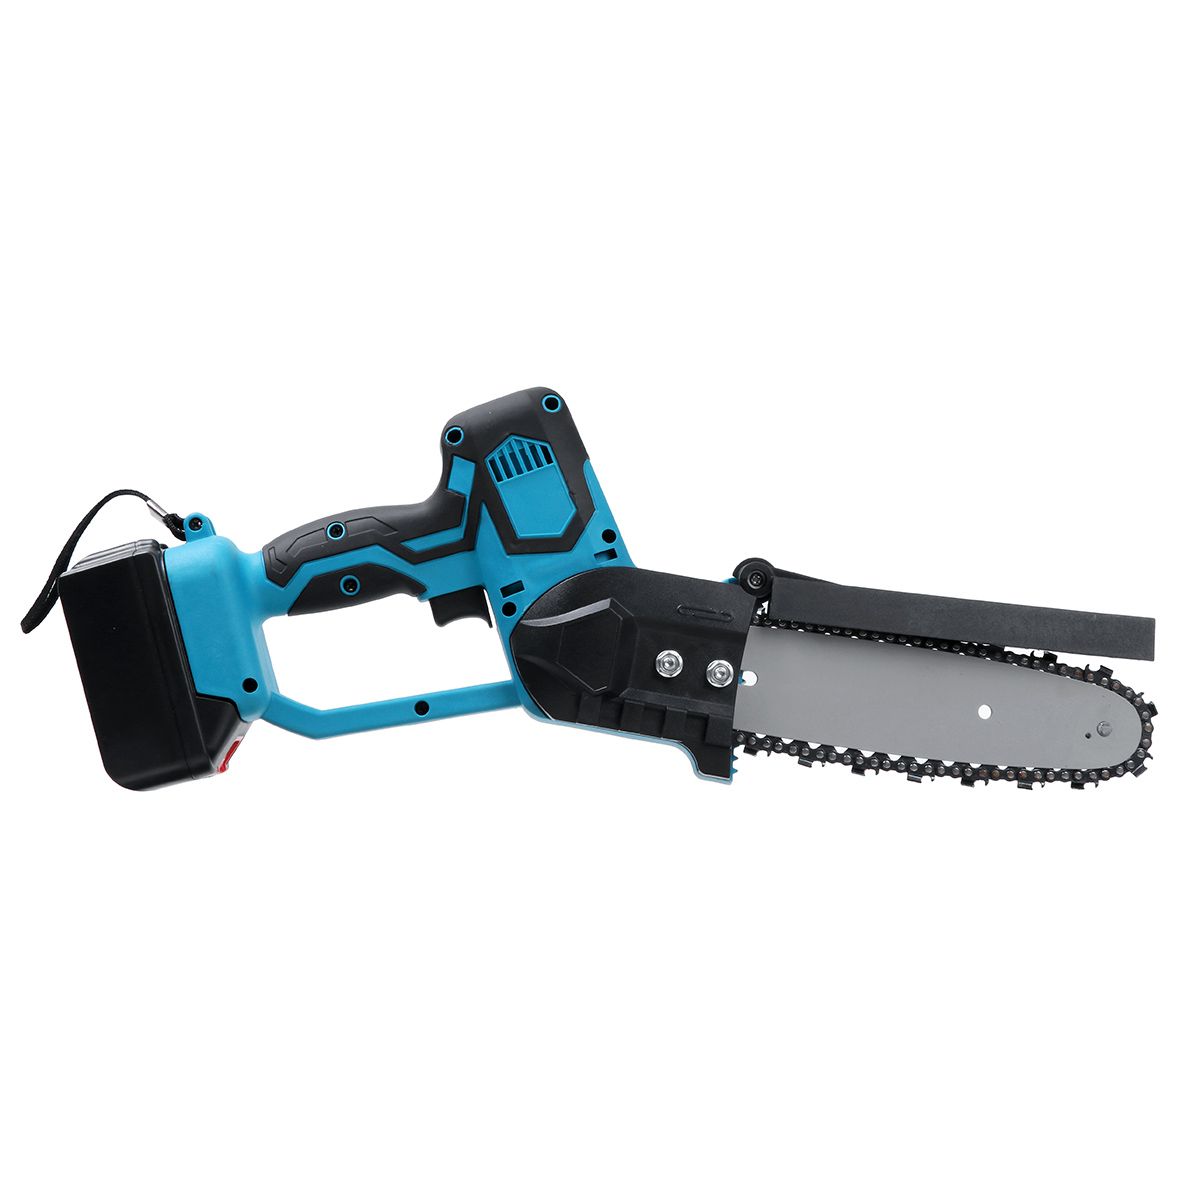 1080W-8-Inch-Electric-Cordless-Chainsaw-Chain-Saw-Handheld-Garden-Wood-Cutting-Tool-with-Battery-1764803